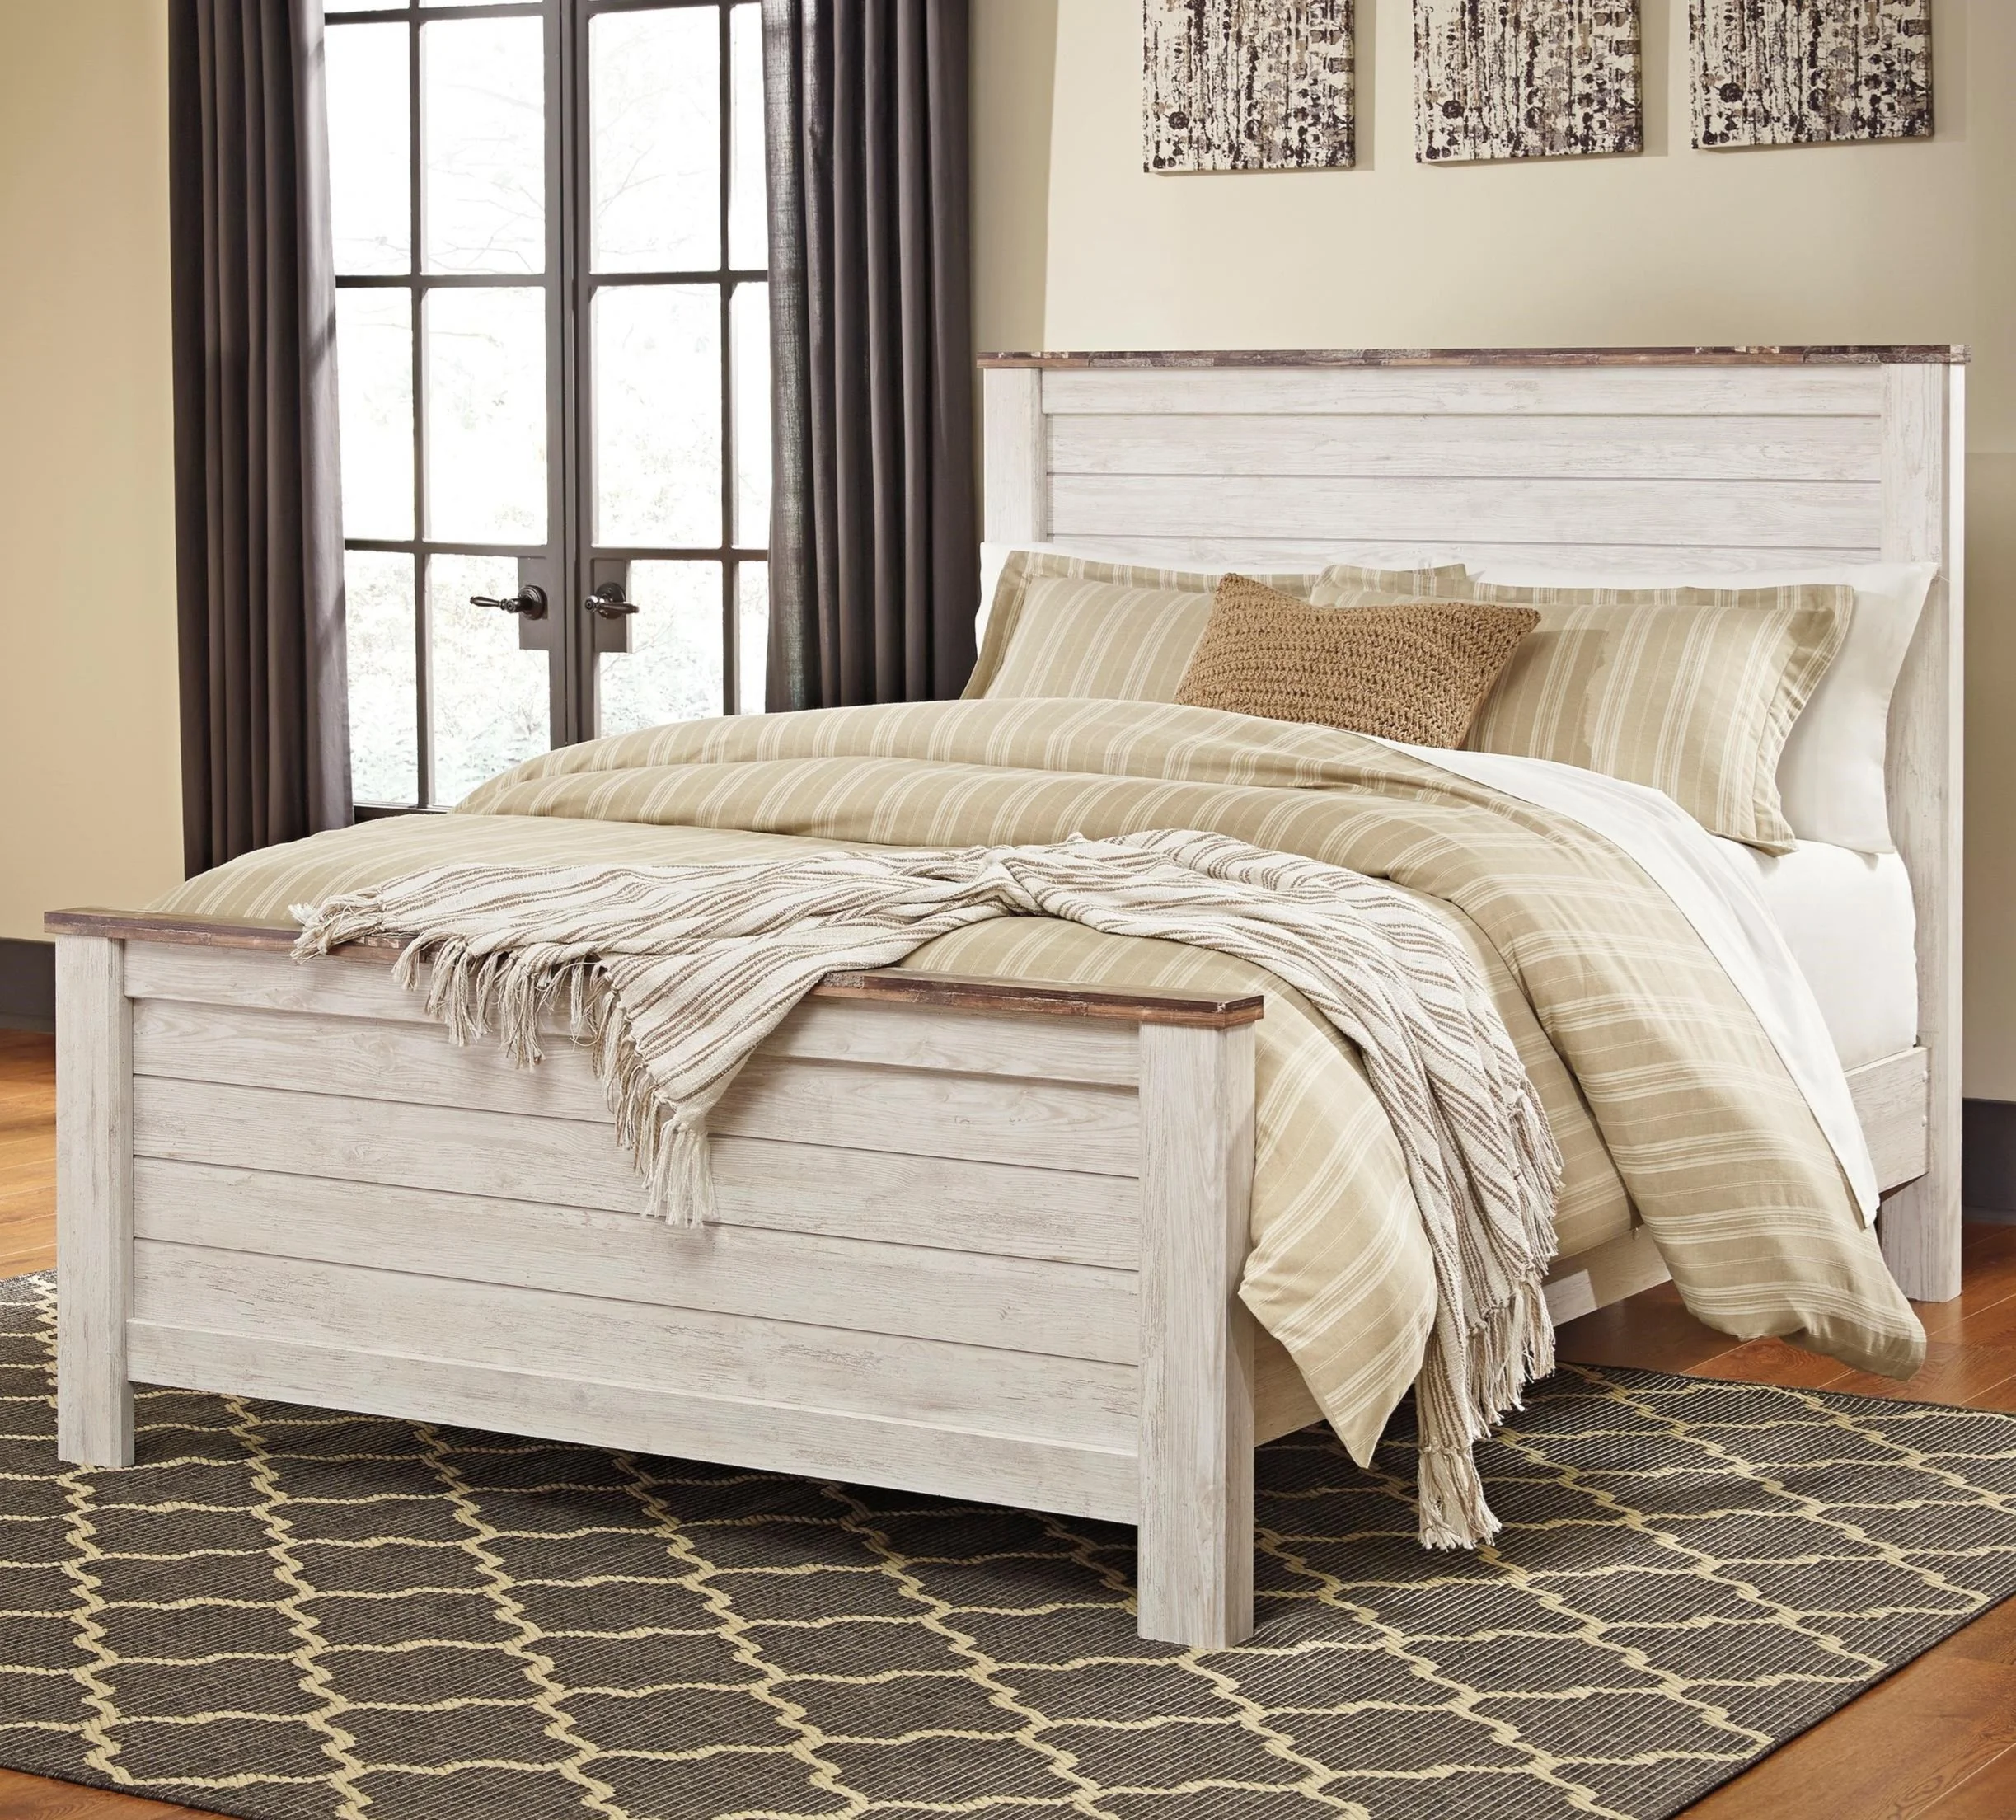 Bear Creek White Queen Bedroom Set W/ Chest Signature Home Furniture